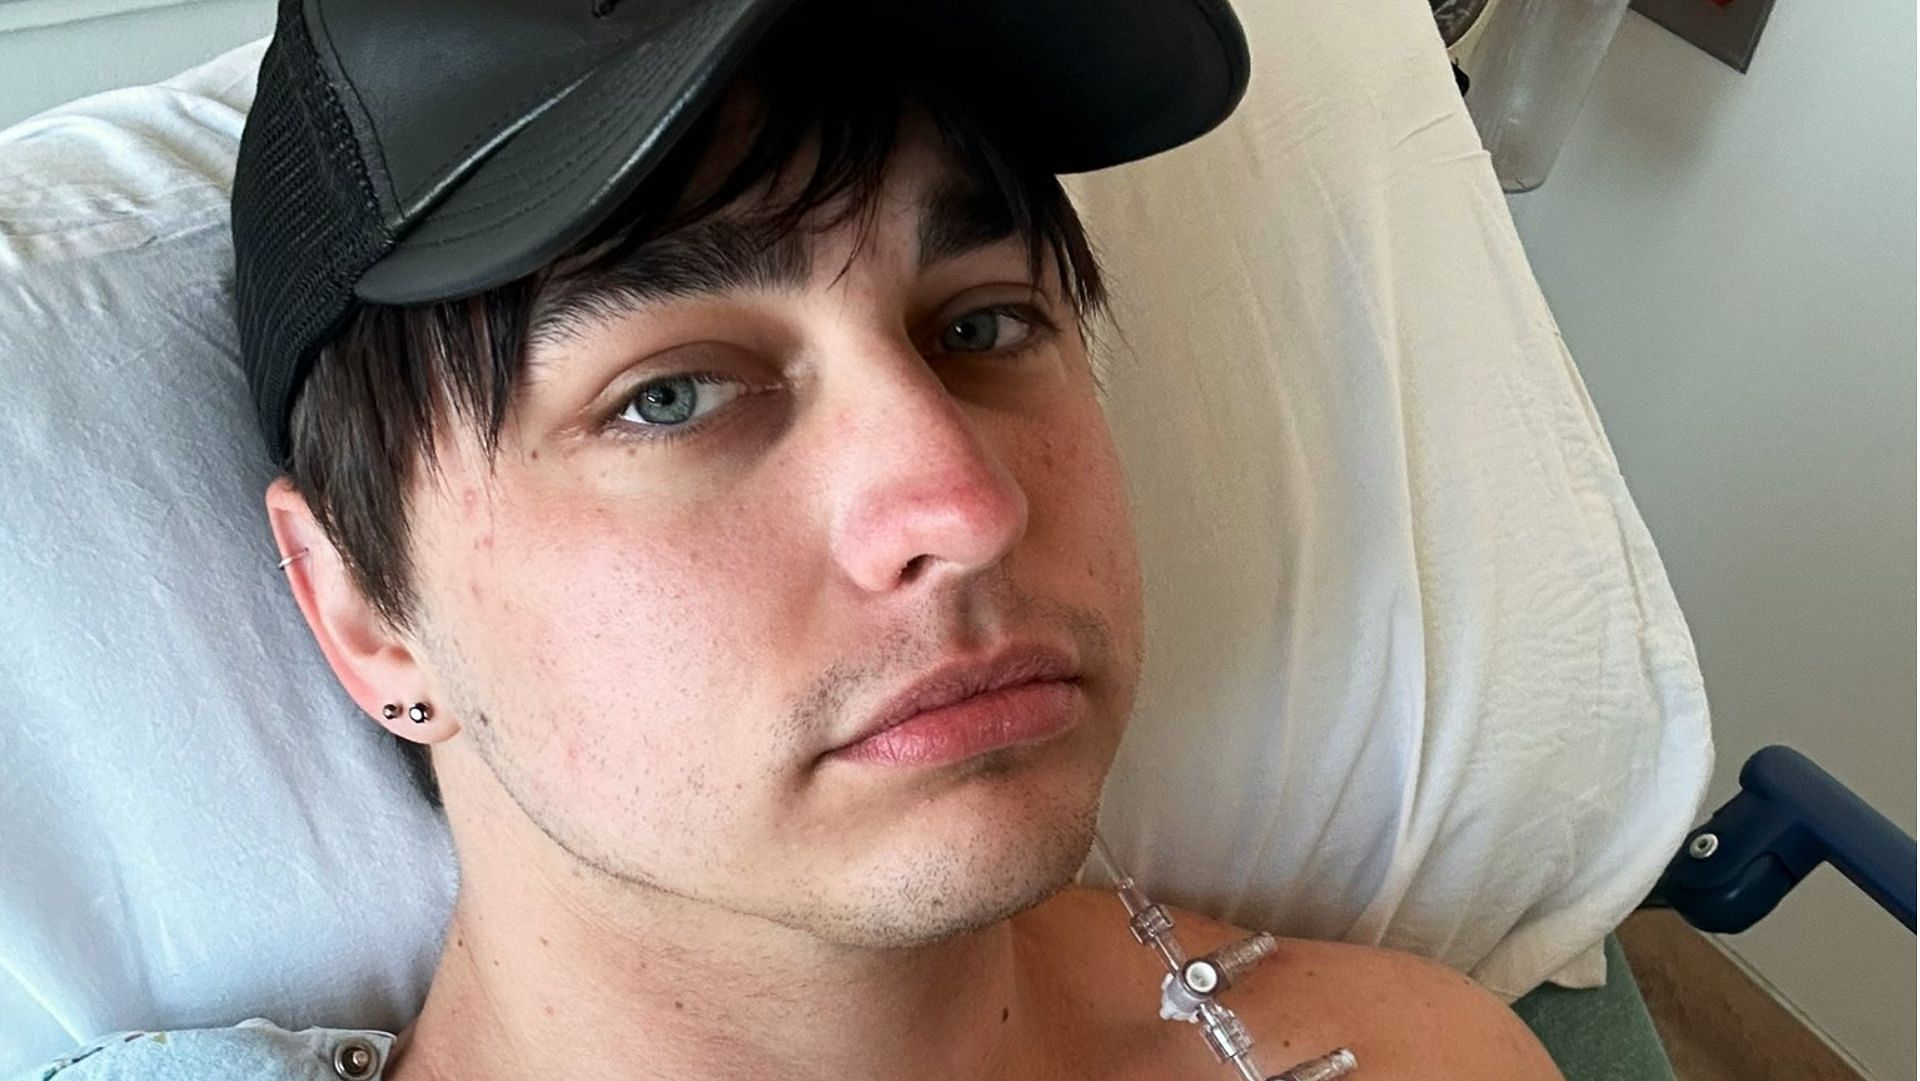 Who is Colby Brock? In a social media post, he wrote, "F**k Cancer."